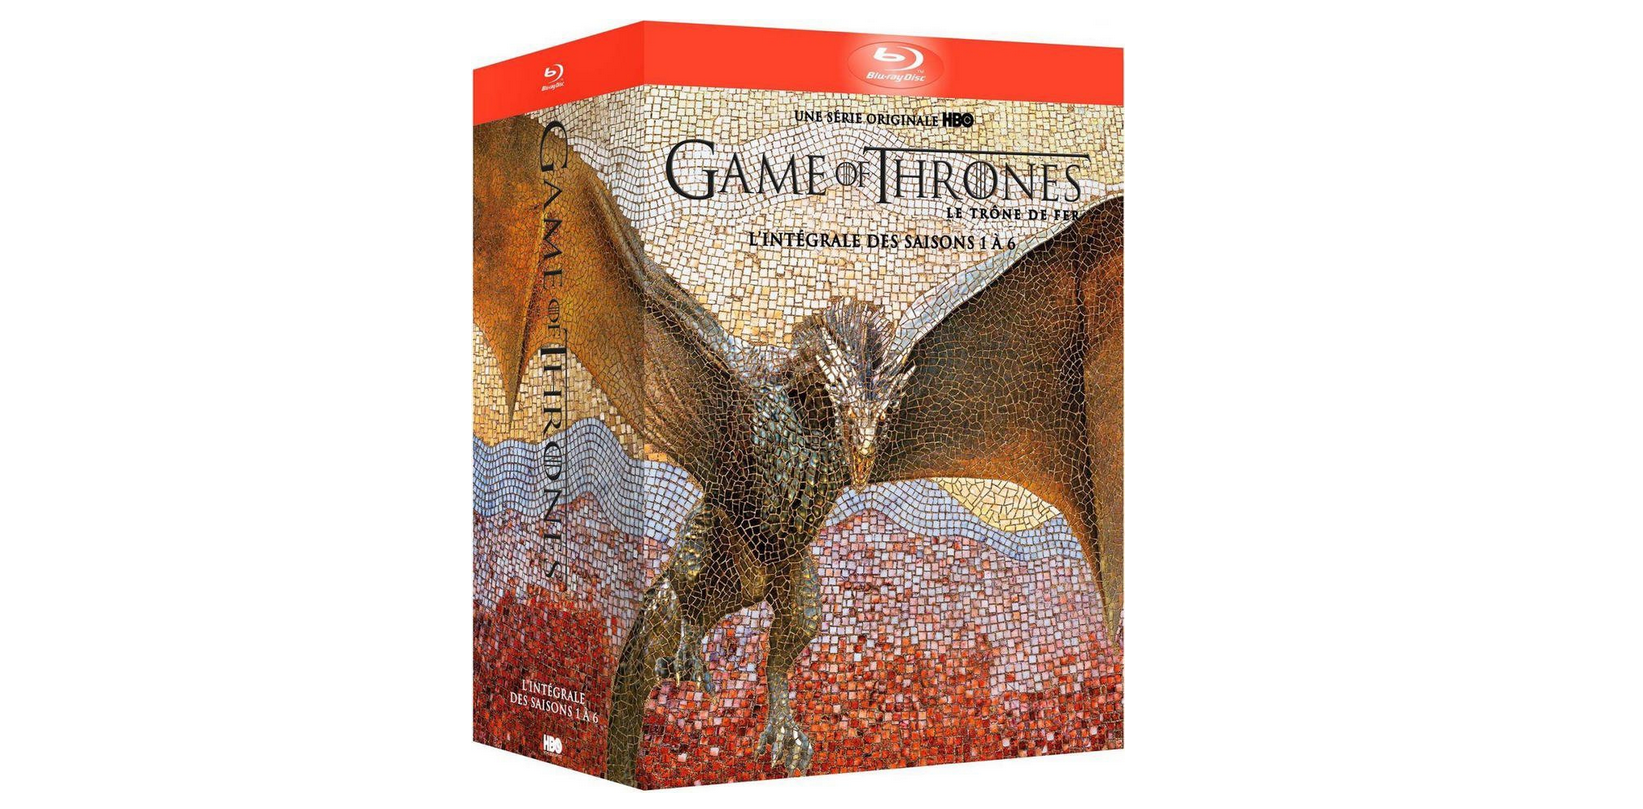 How to download game of thrones amazon prime